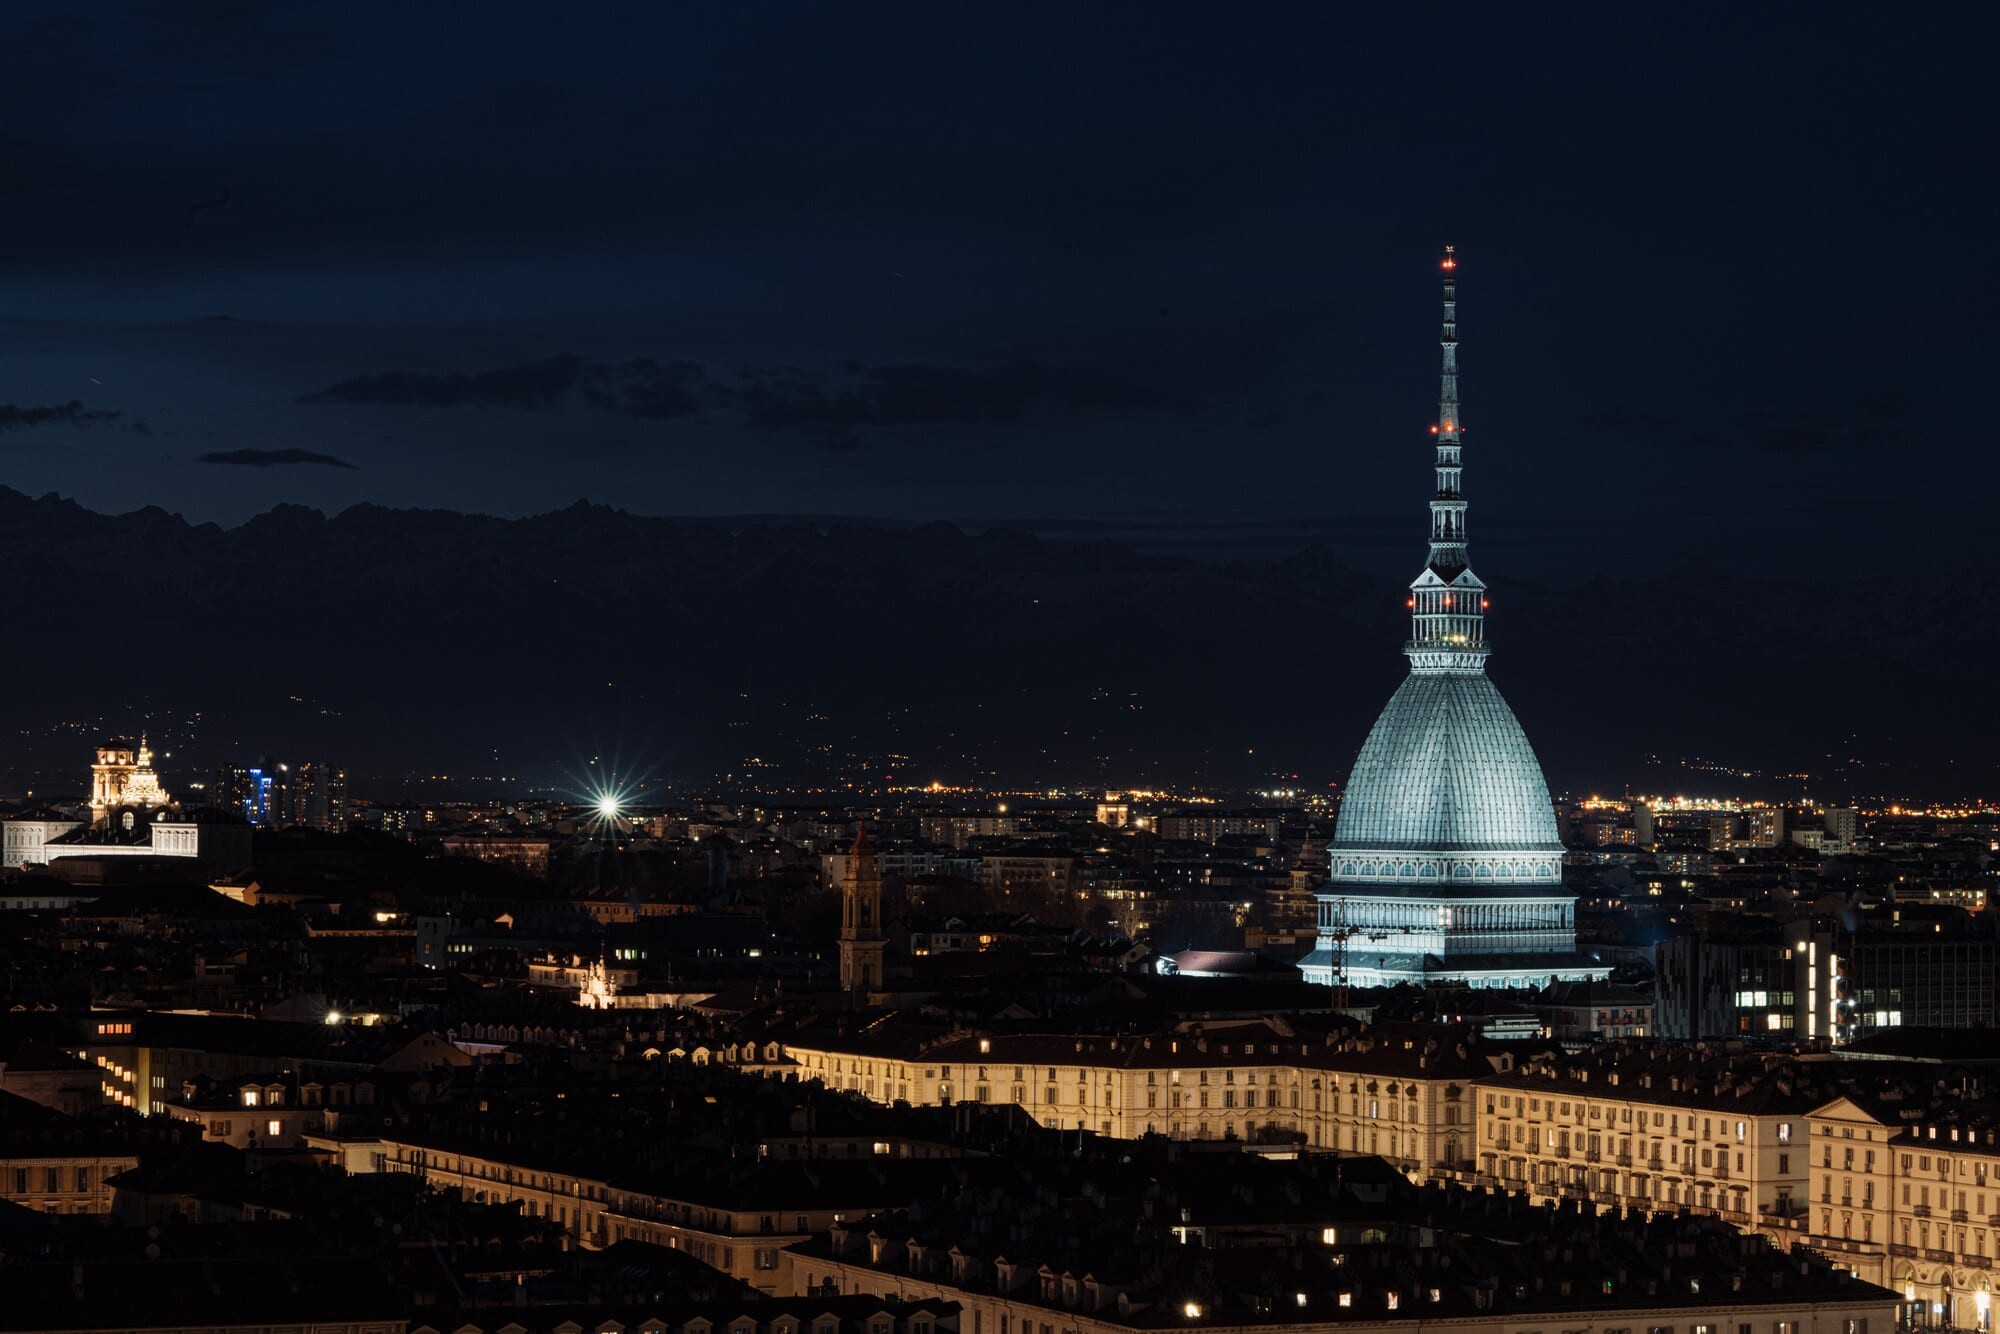 Turin: Sometimes called "the cradle of Italian liberty" for having been the political and intellectual center of the Risorgimento[9] as well as the birthplace of notable individuals who contributed to it, such as Cavour, Nightscape. 2000x1340 HD Wallpaper.